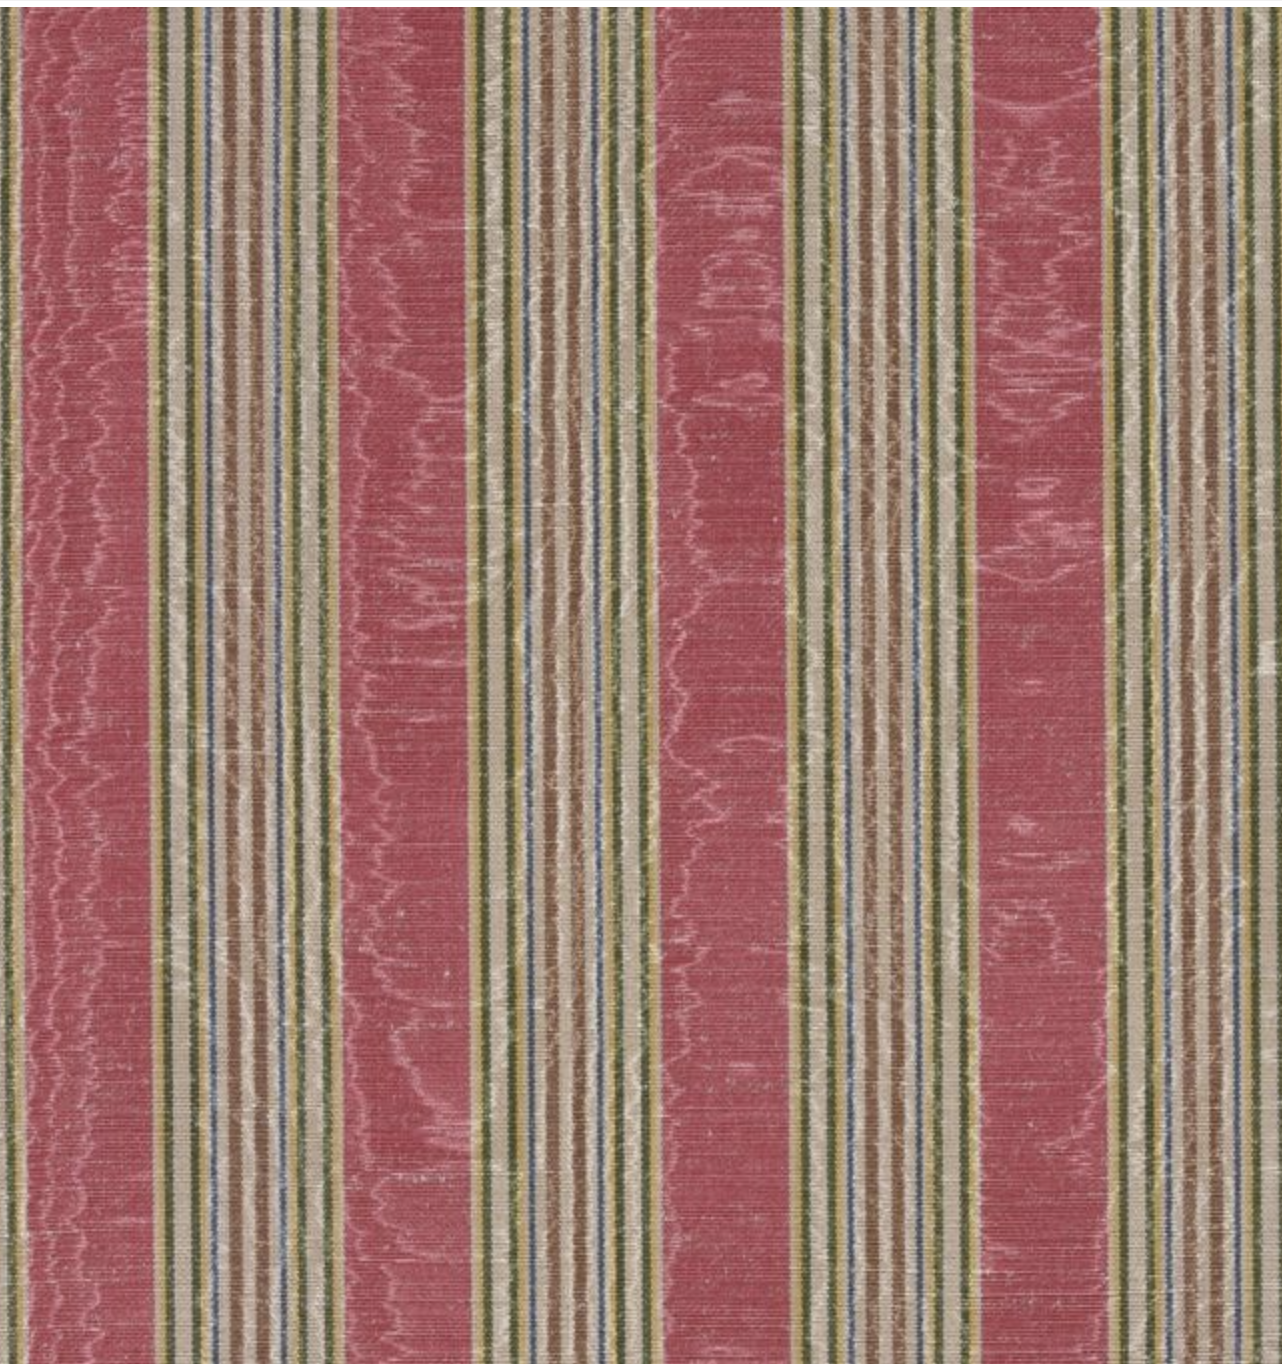 Misa Moire Stripe Fabric by Marvic